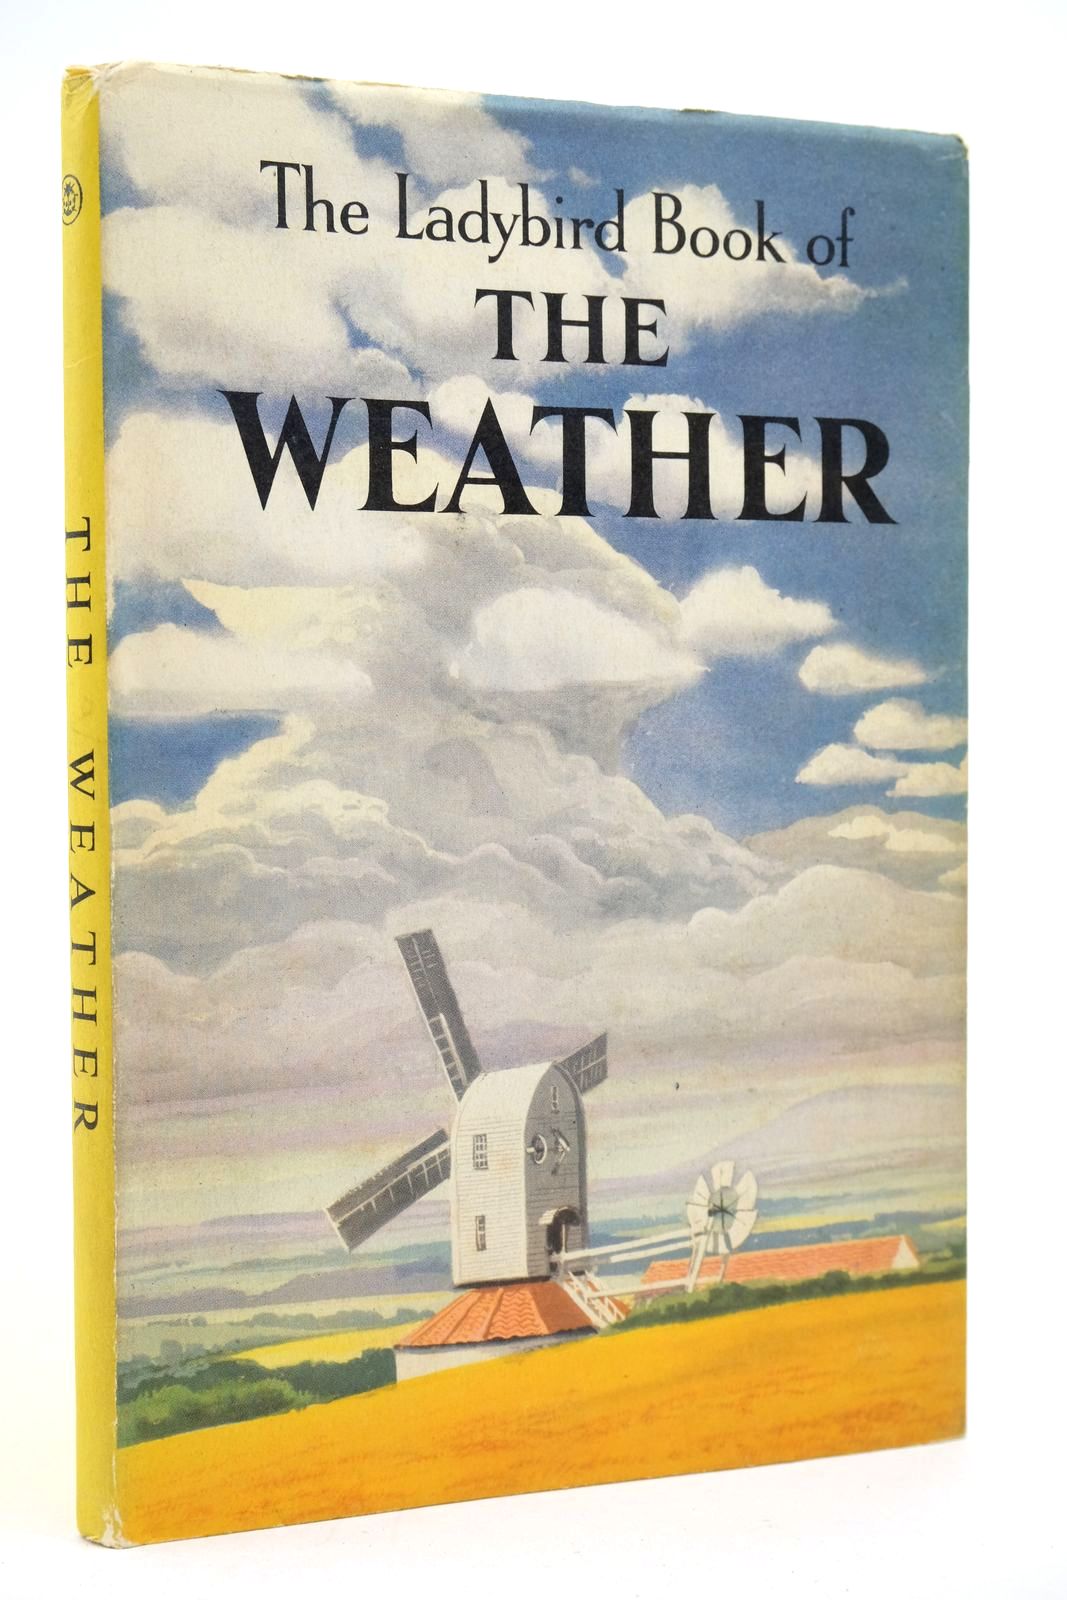 Photo of THE LADYBIRD BOOK OF THE WEATHER written by Newing, F.E.
Bowood, Richard illustrated by Ayton, Robert published by Wills & Hepworth Ltd. (STOCK CODE: 2139707)  for sale by Stella & Rose's Books